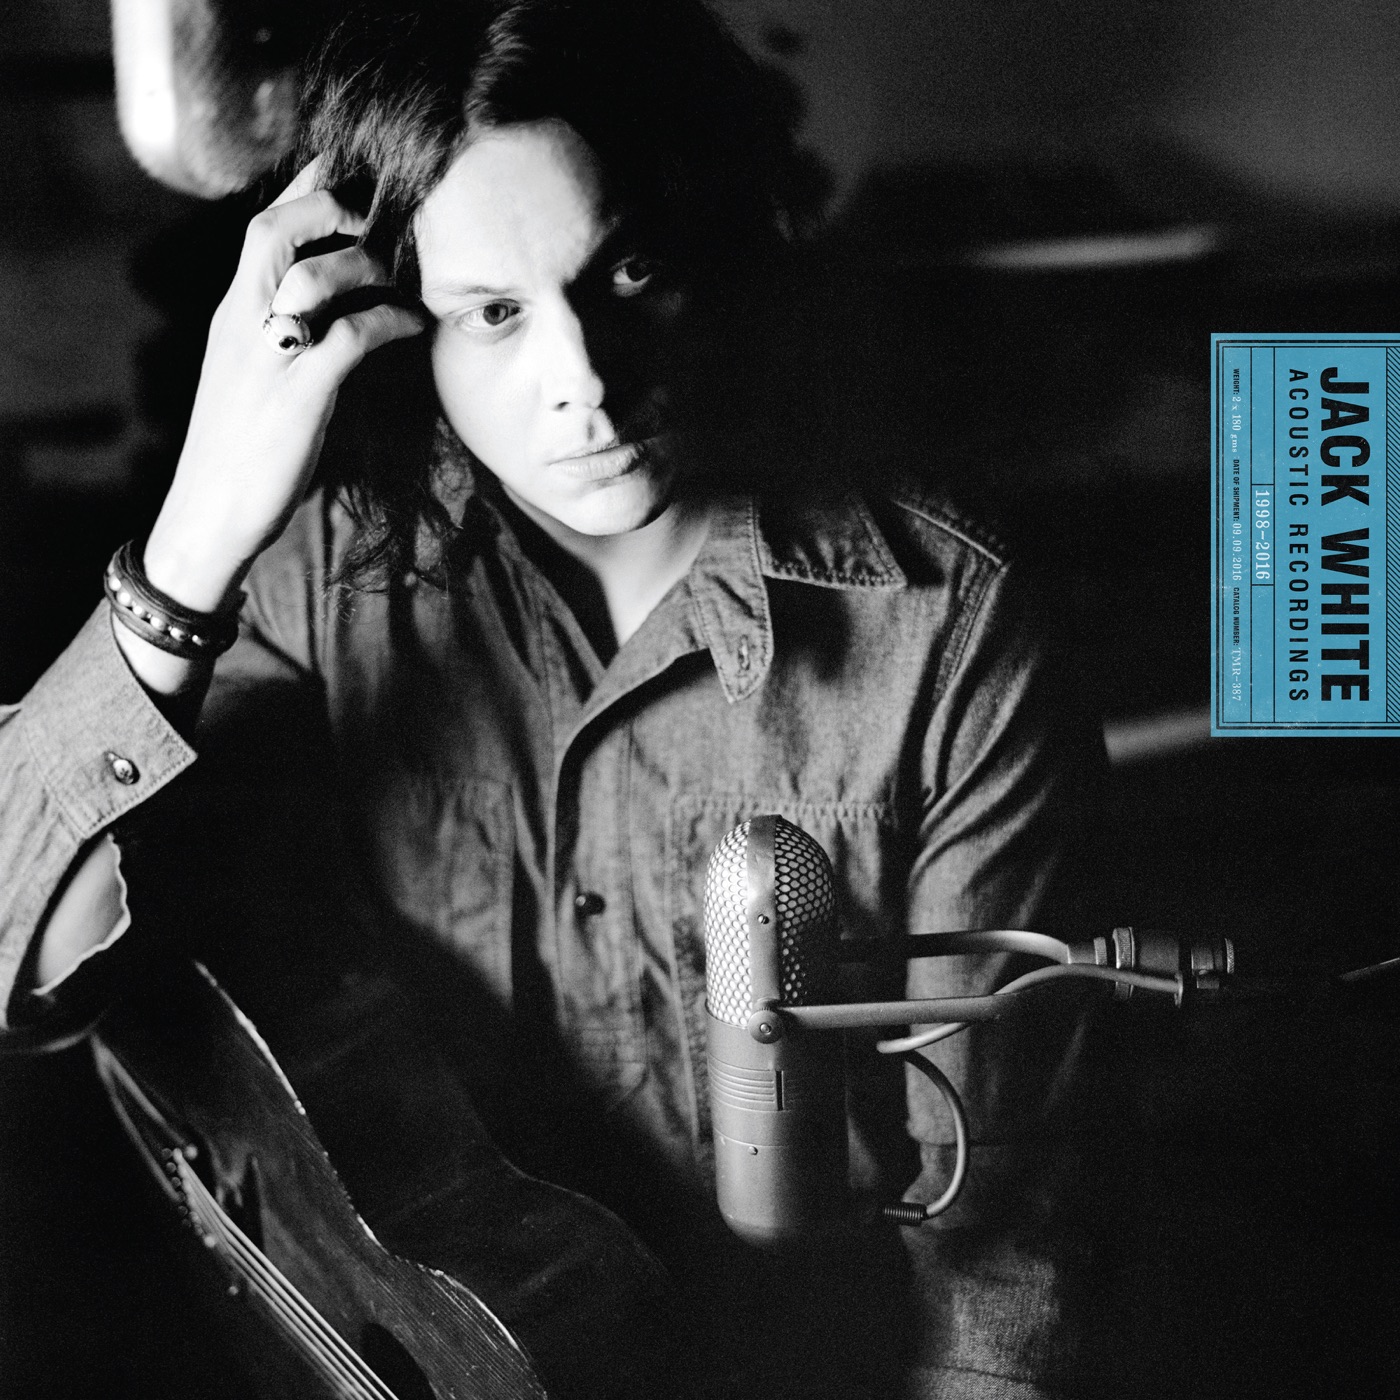 Jack White Acoustic Recordings 1998 - 2016 by Jack White